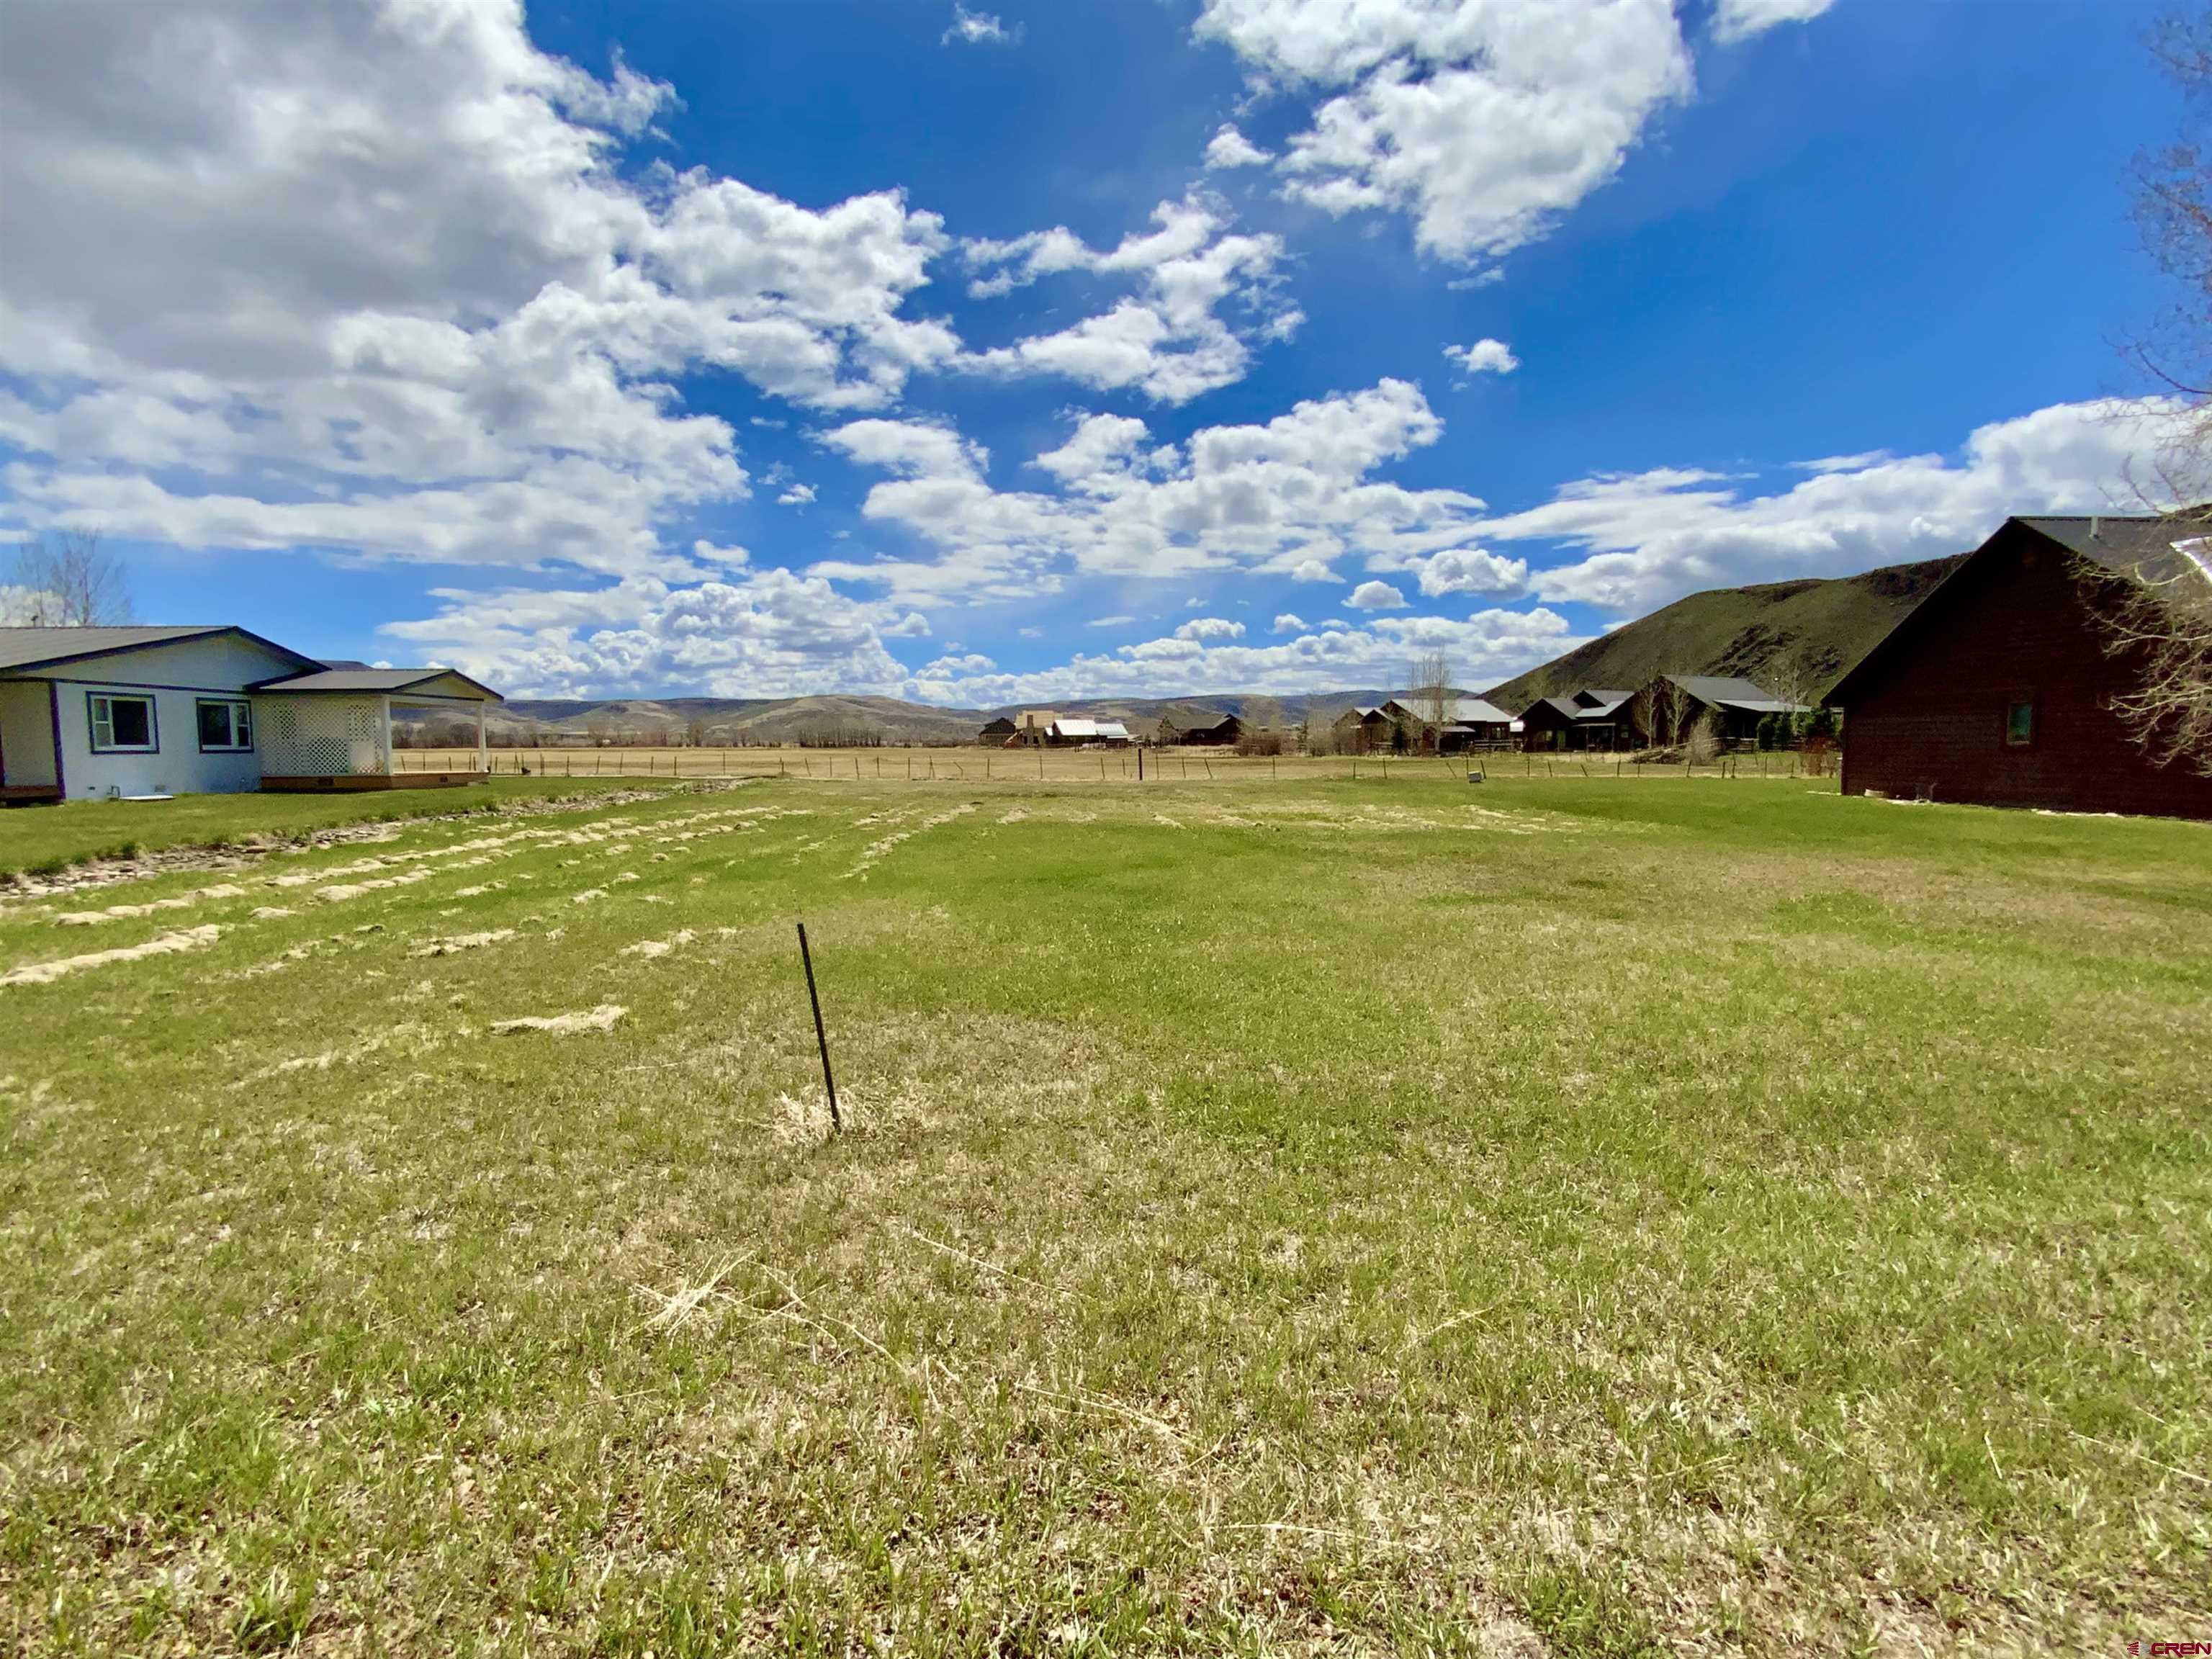 Looking for the perfect location to build the home of your dreams?  Check out 1080 Fairway Lane, a level building site located near the Dos Rios Golf Course.  Great views of the surrounding mountains and ranchlands to the back of the property.  The minimum square footage for the home is 1,400 and the garage minimum square footage is 400.